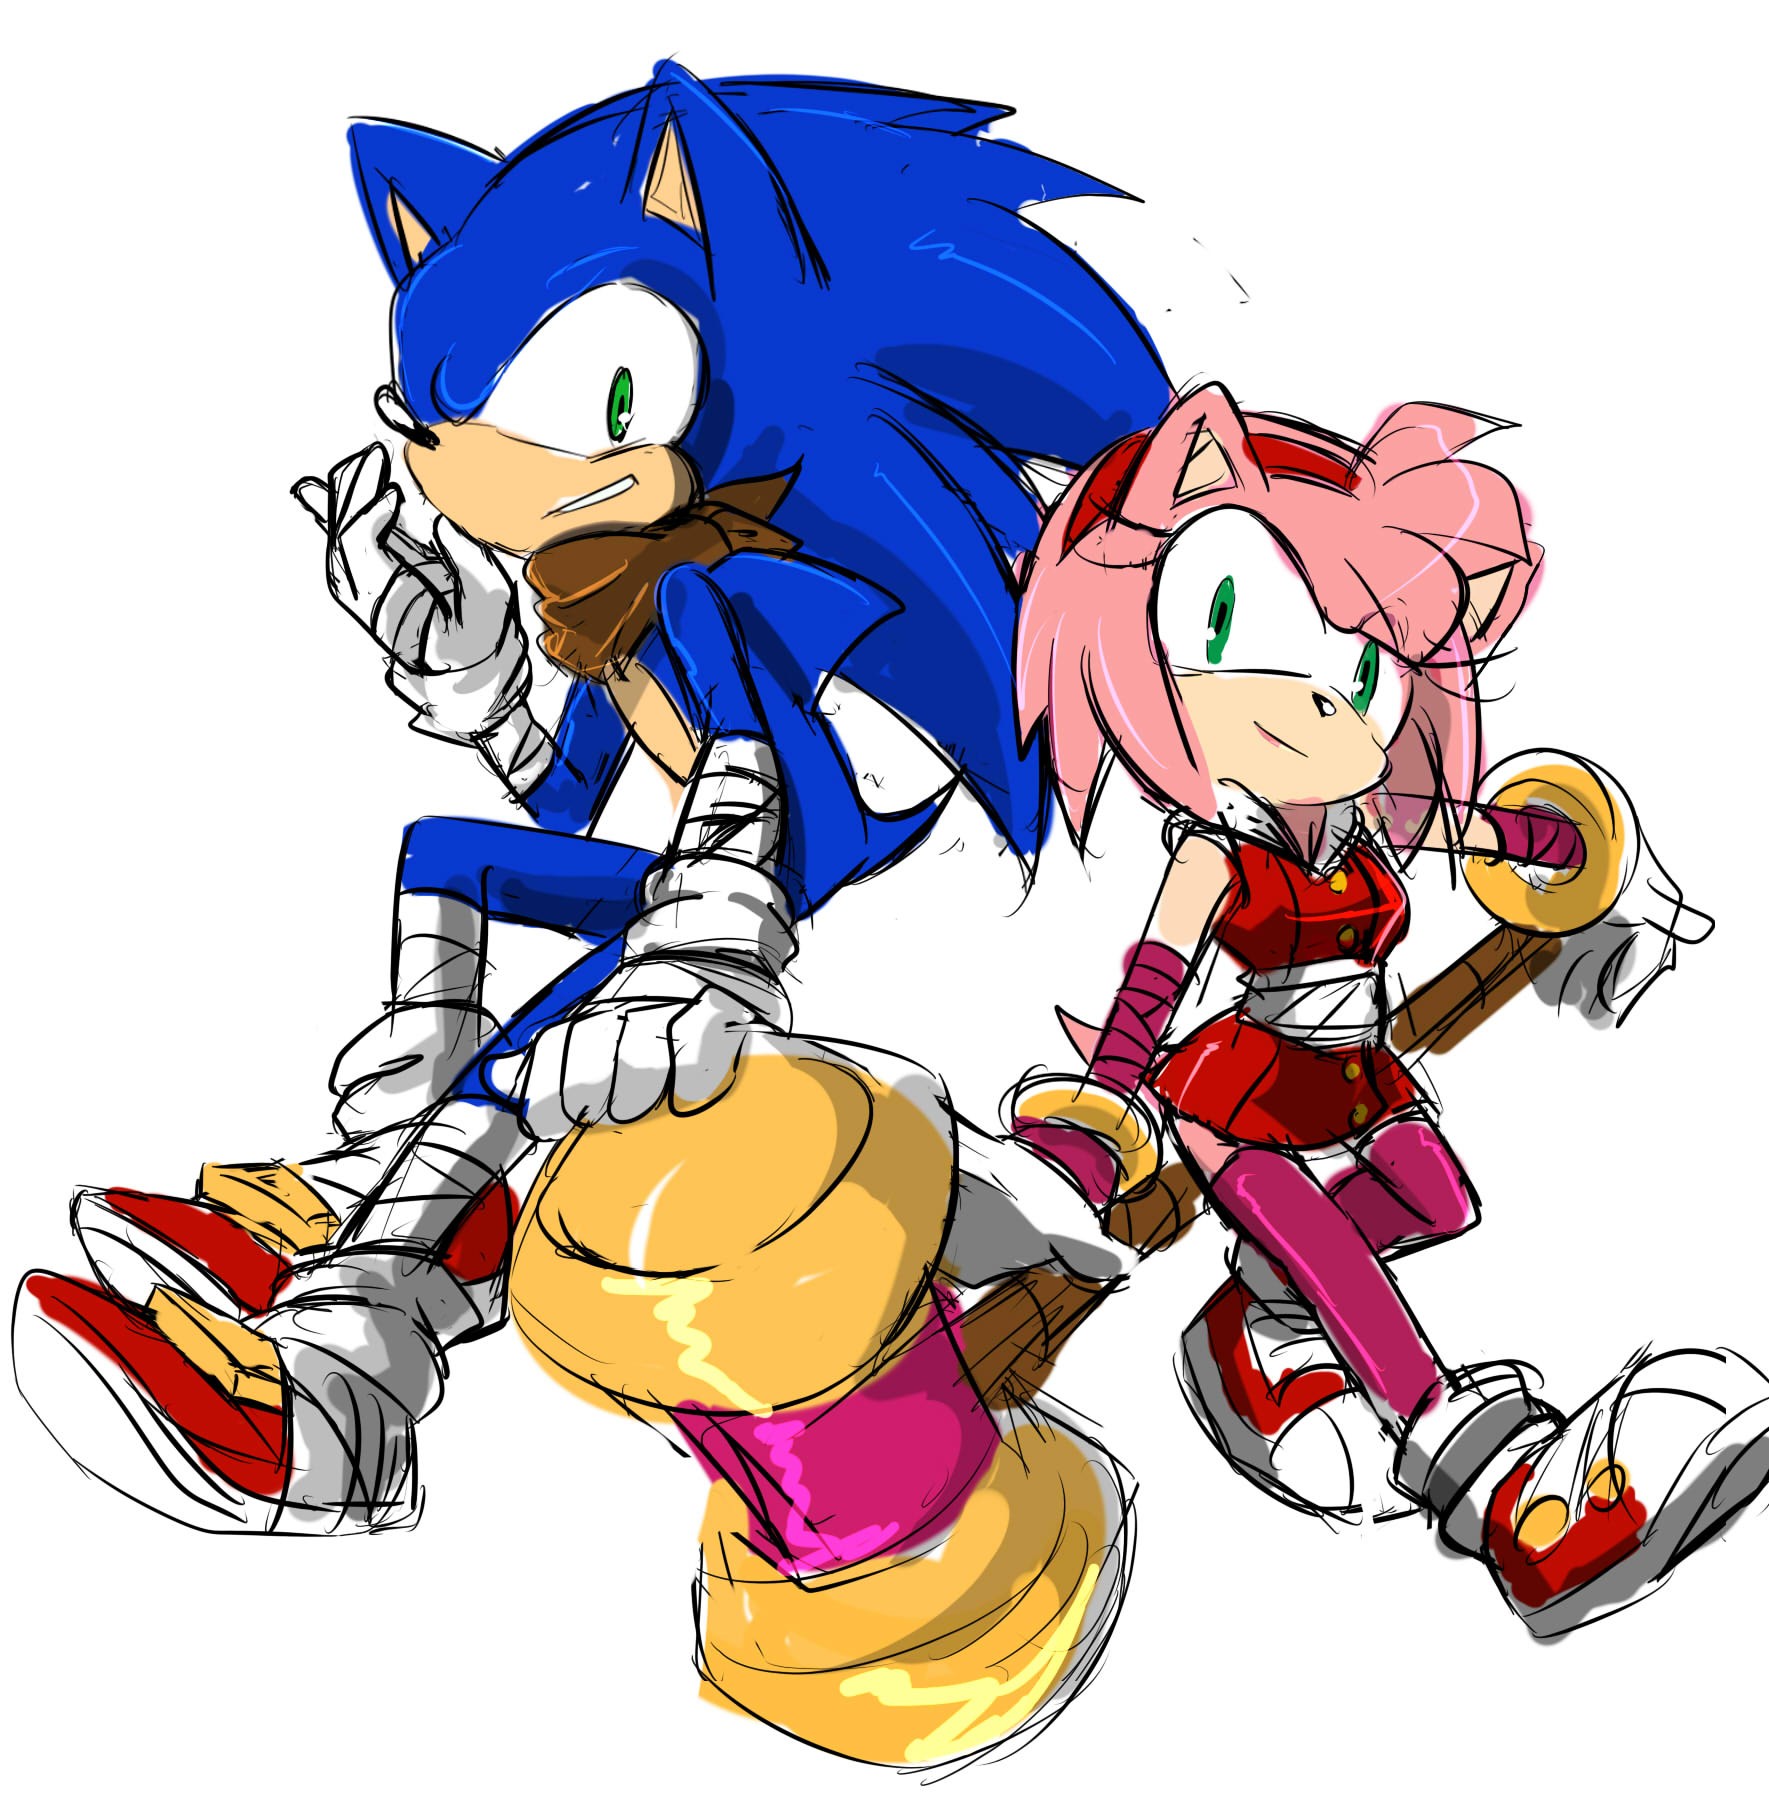 General 1769x1796 Sega video games Sonic the Hedgehog white background fan art video game characters Amy Rose